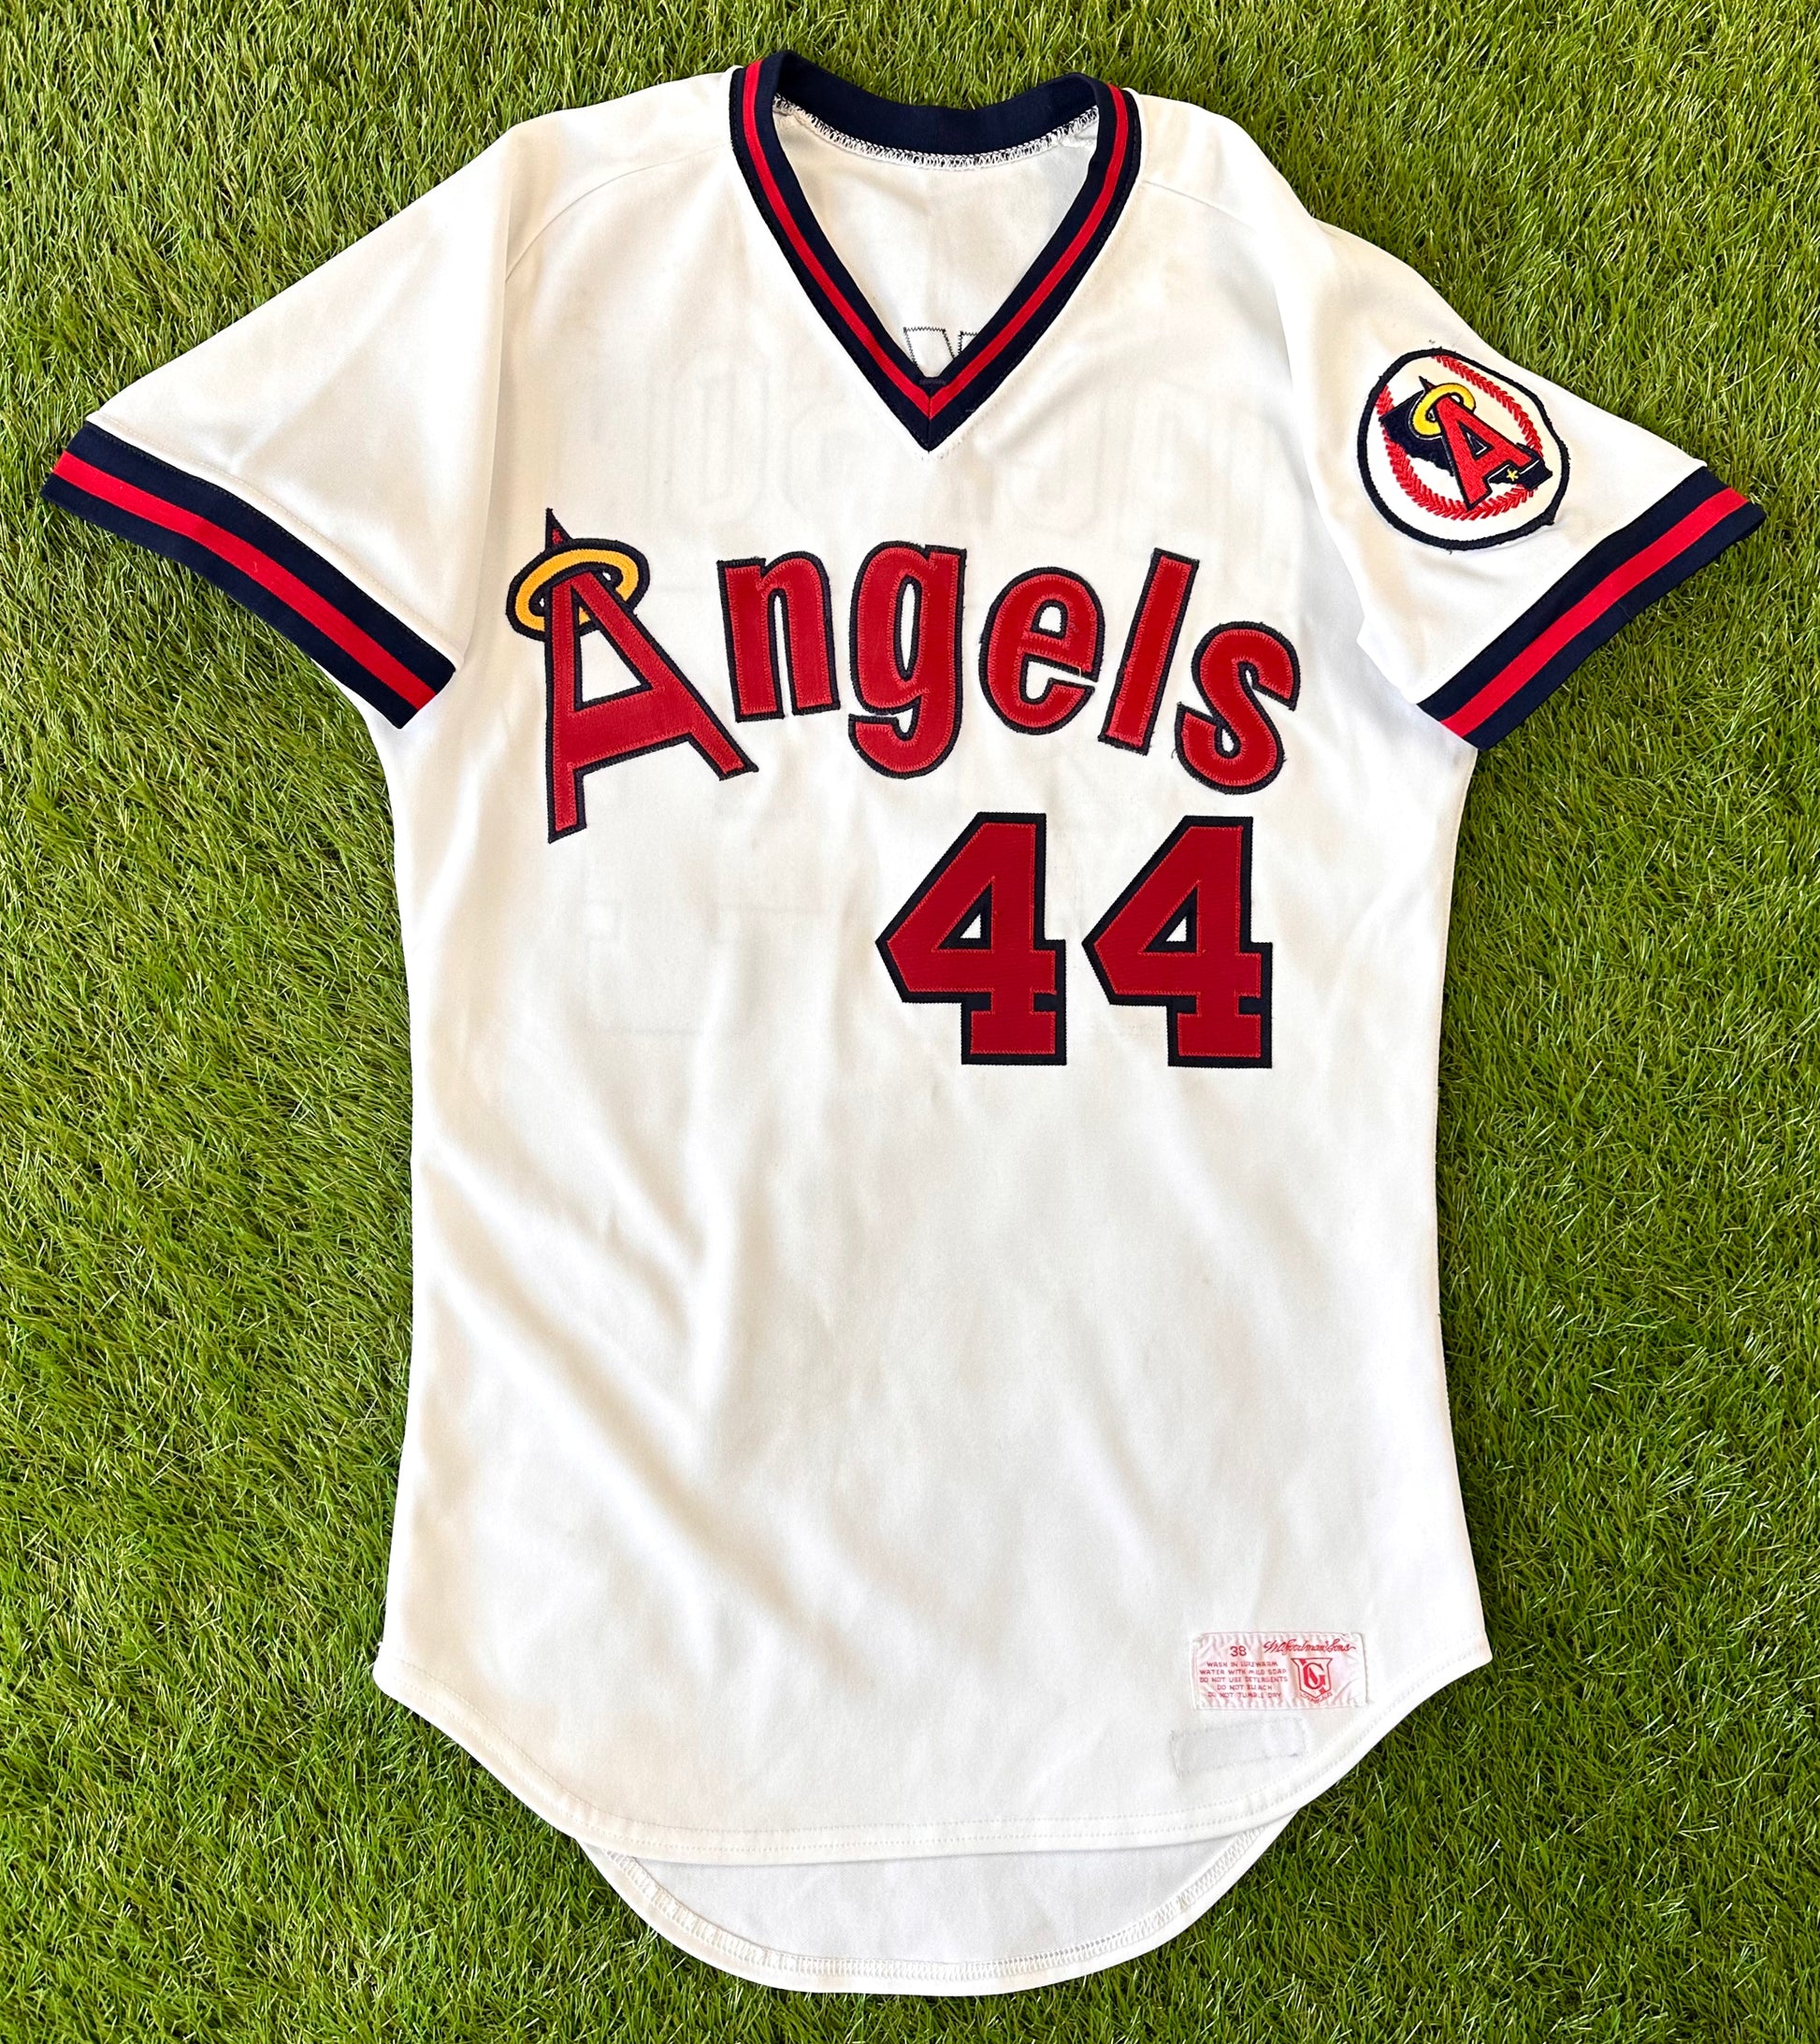 Reggie Jackson California Angels jersey a hall of fame player for